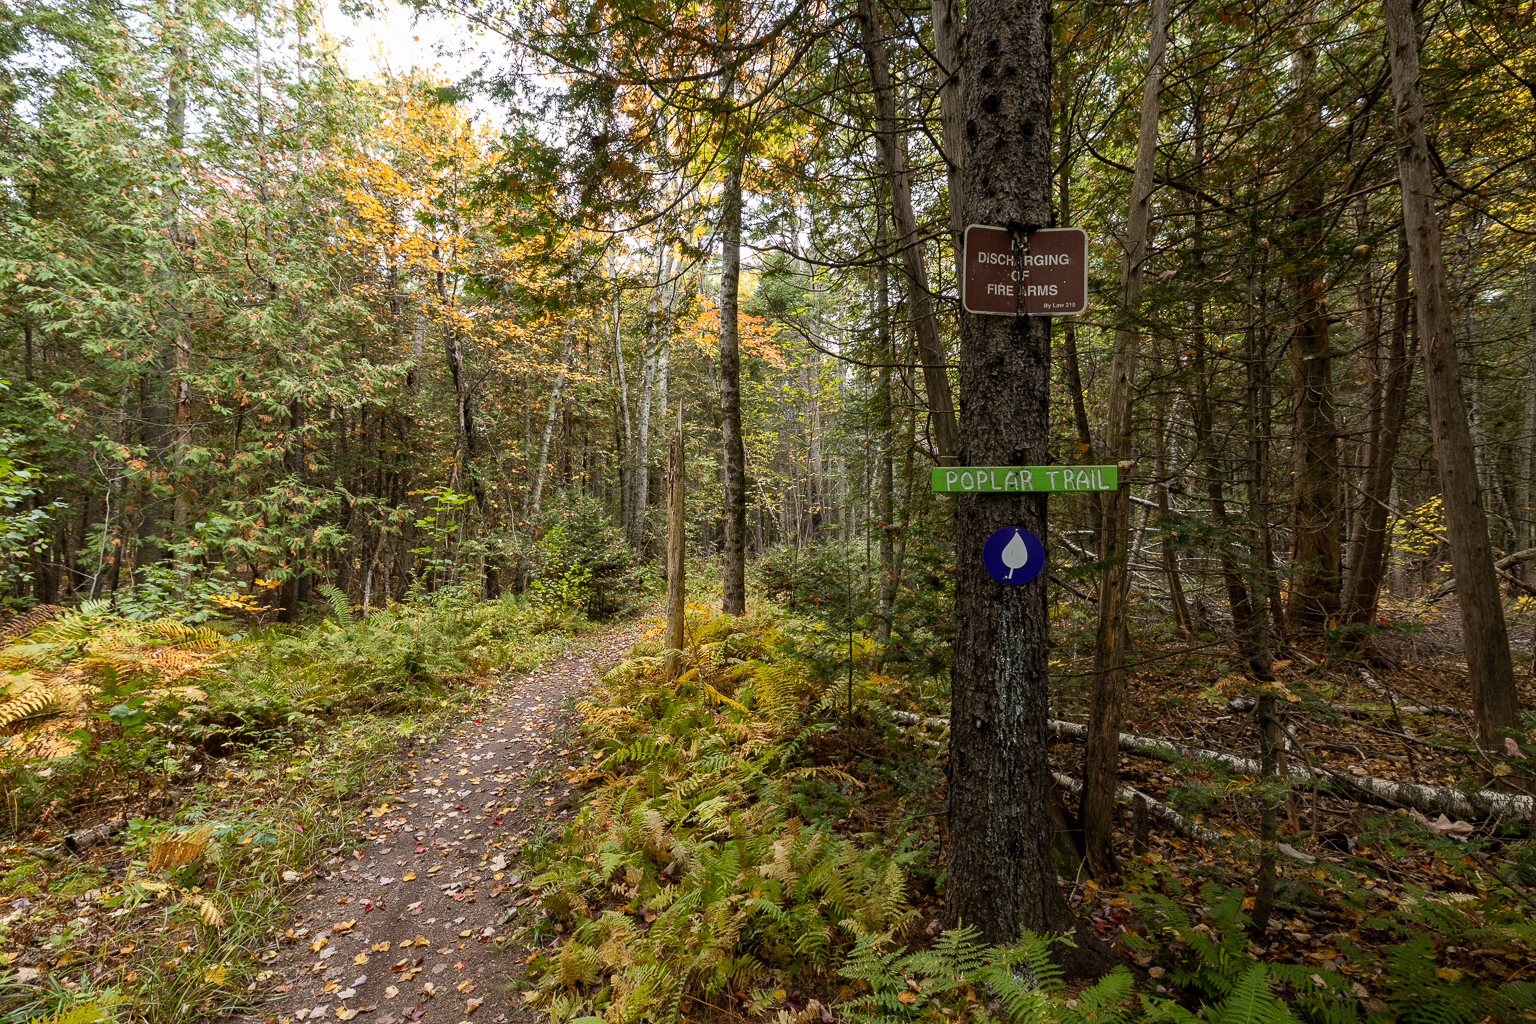 The signs at the start of the Poplar Trail at Deer Park in Oromocto